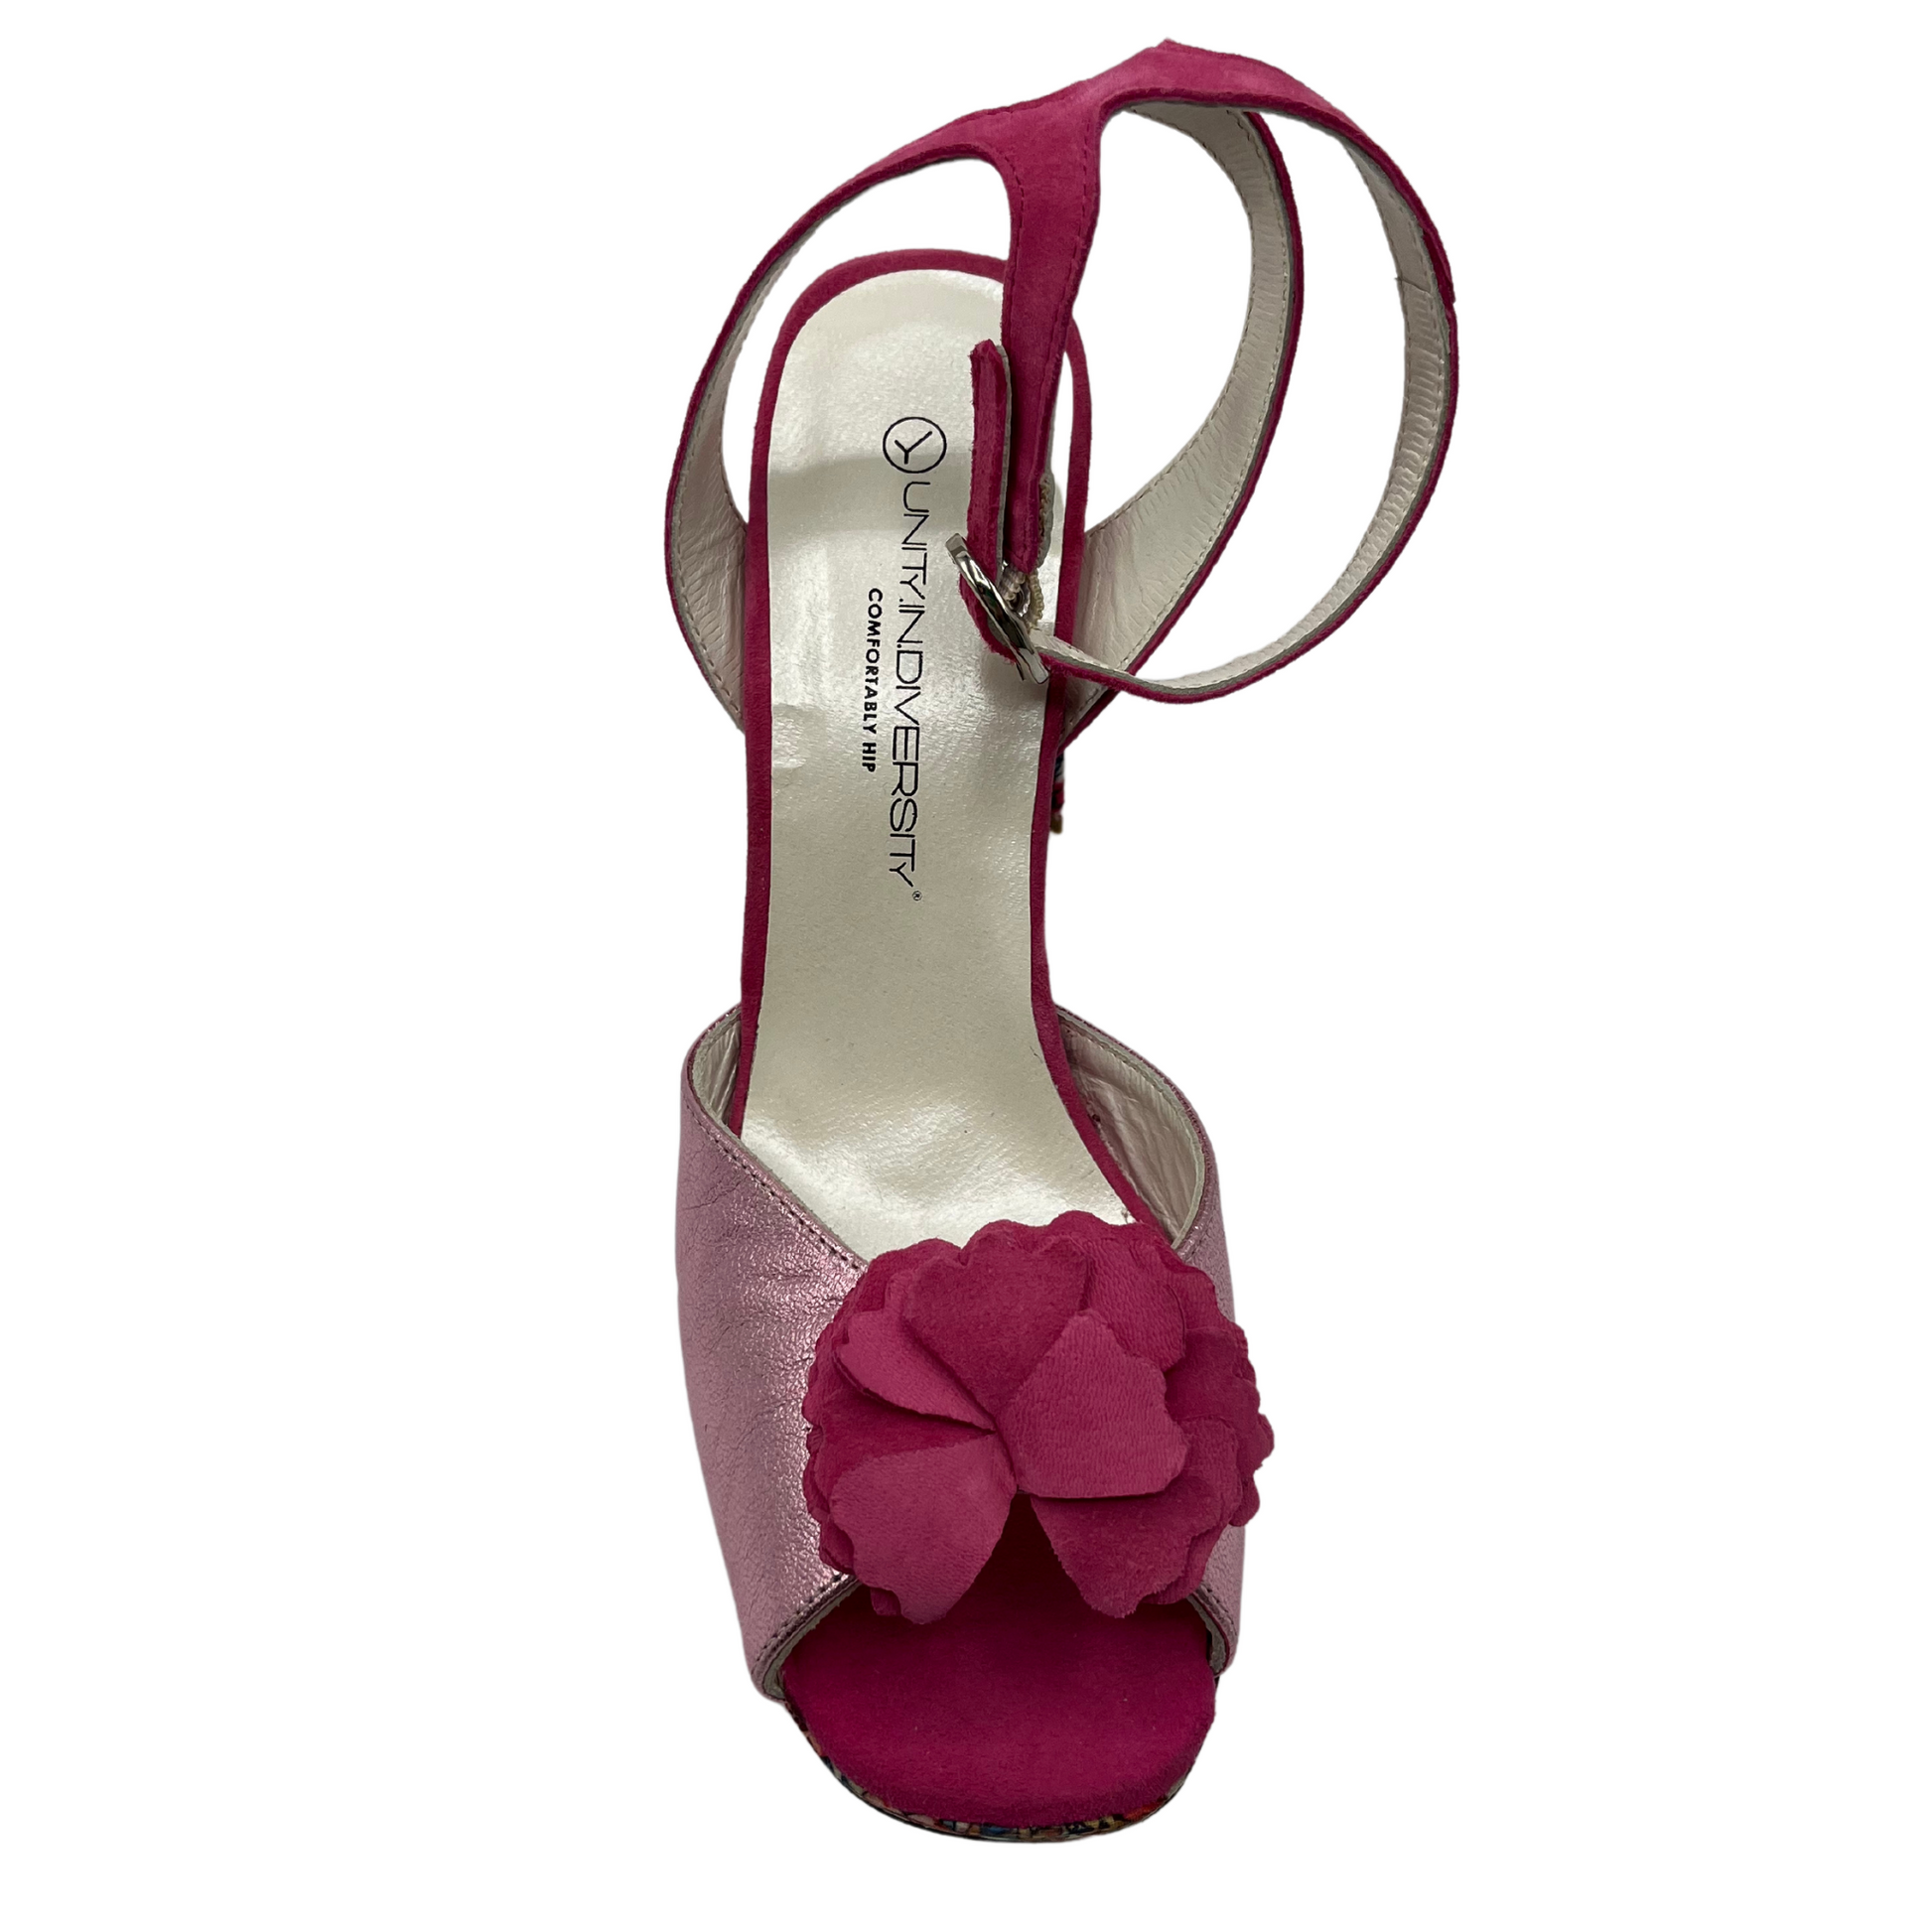 Top view of leather and satin material sandal with block heel and platform sole. Flower accent on toe and adjustable ankle strap